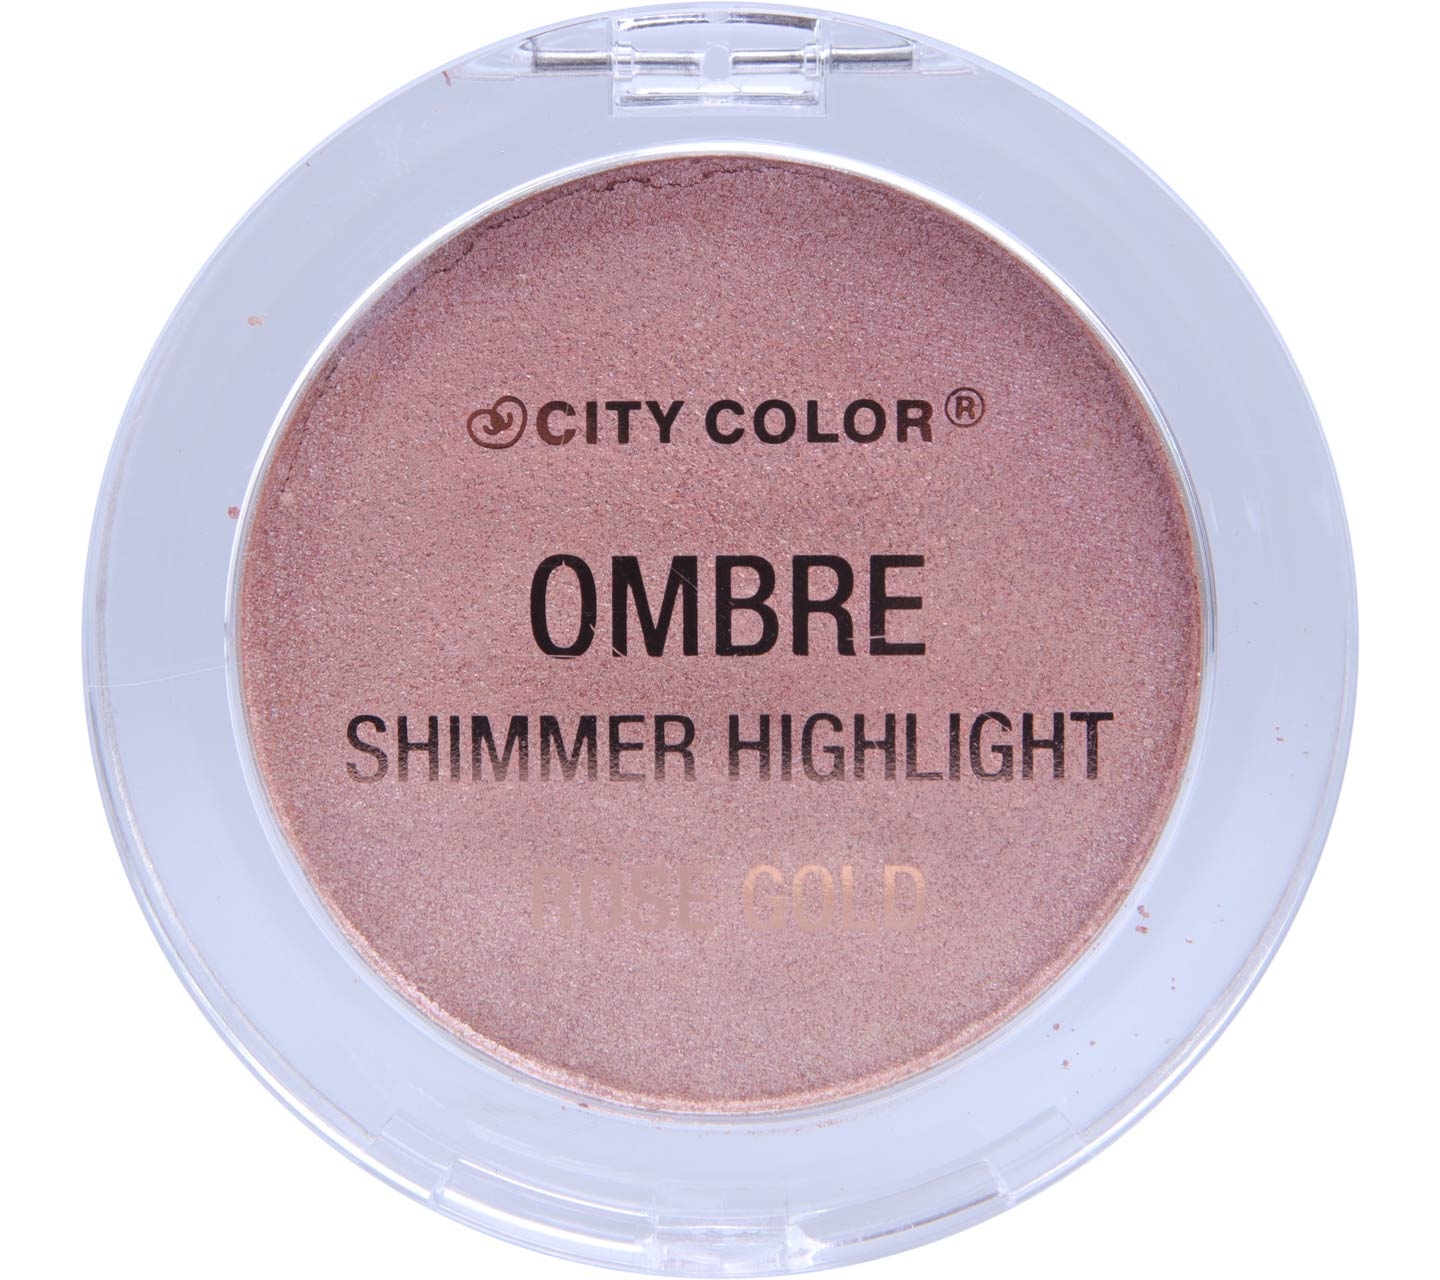 City Color Rose Gold Ombre Shimmer Highlight Faces